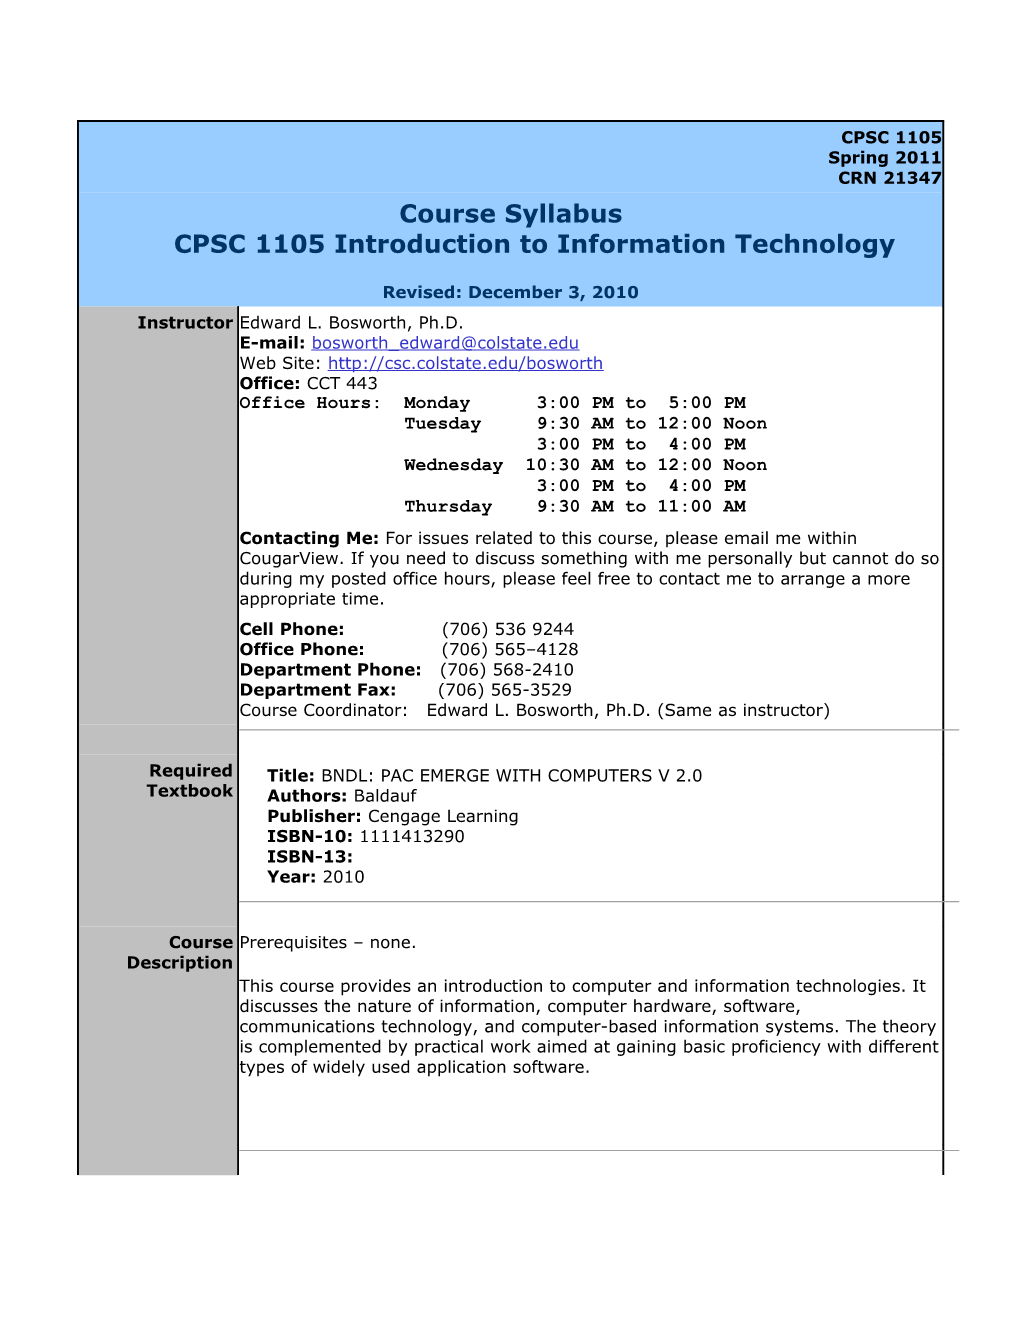 Course Syllabuscpsc 1105 Introduction to Information Technology